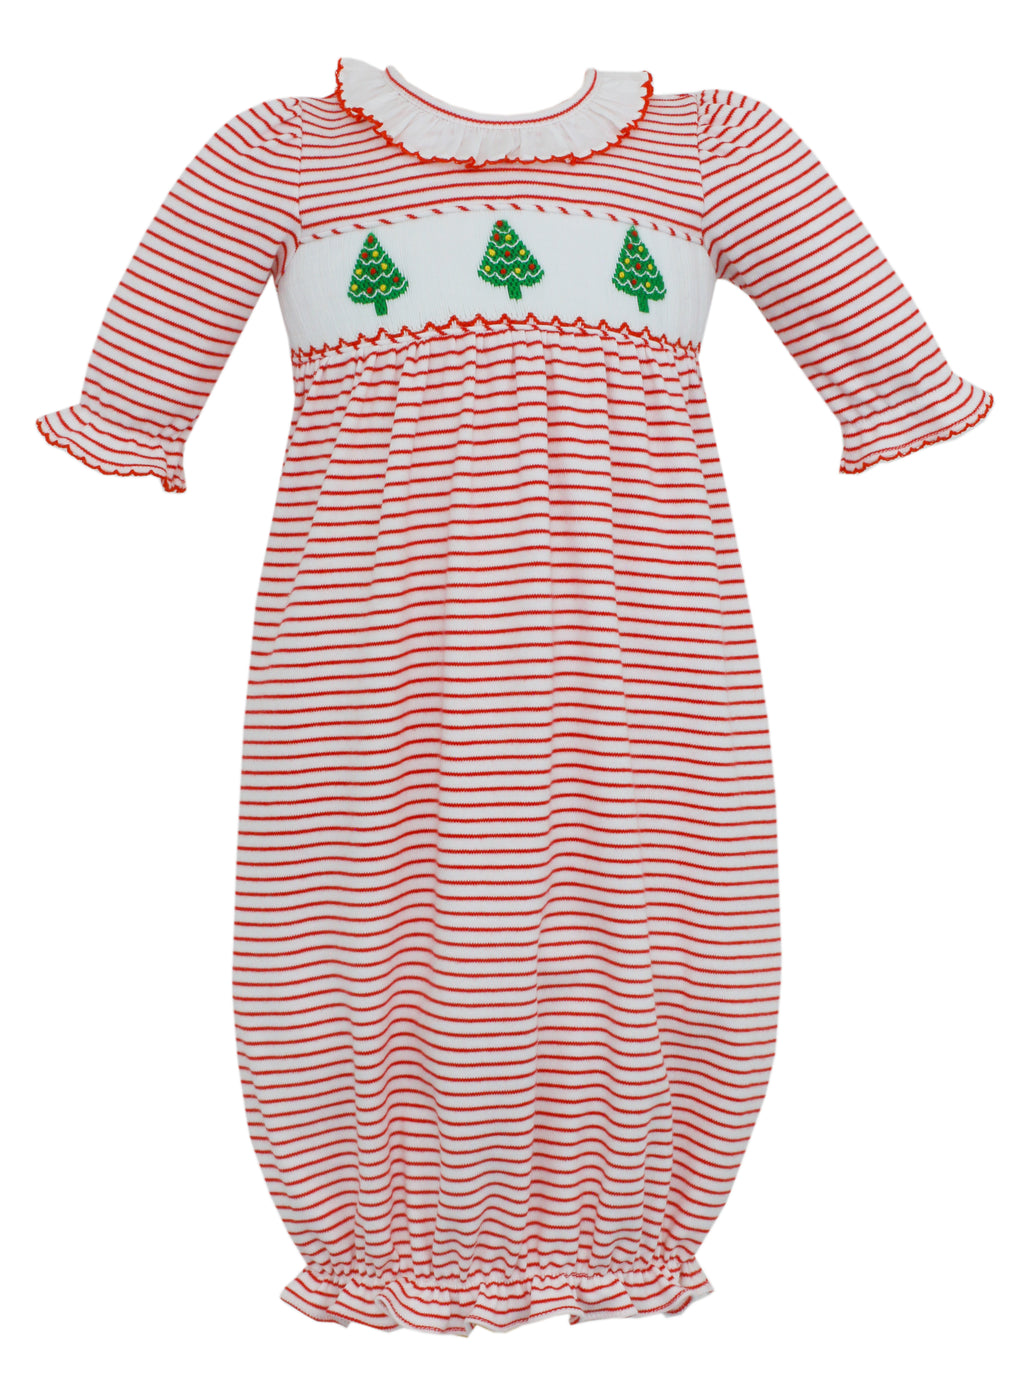 Holiday Trees Red Stripe Knit Girl's Sac